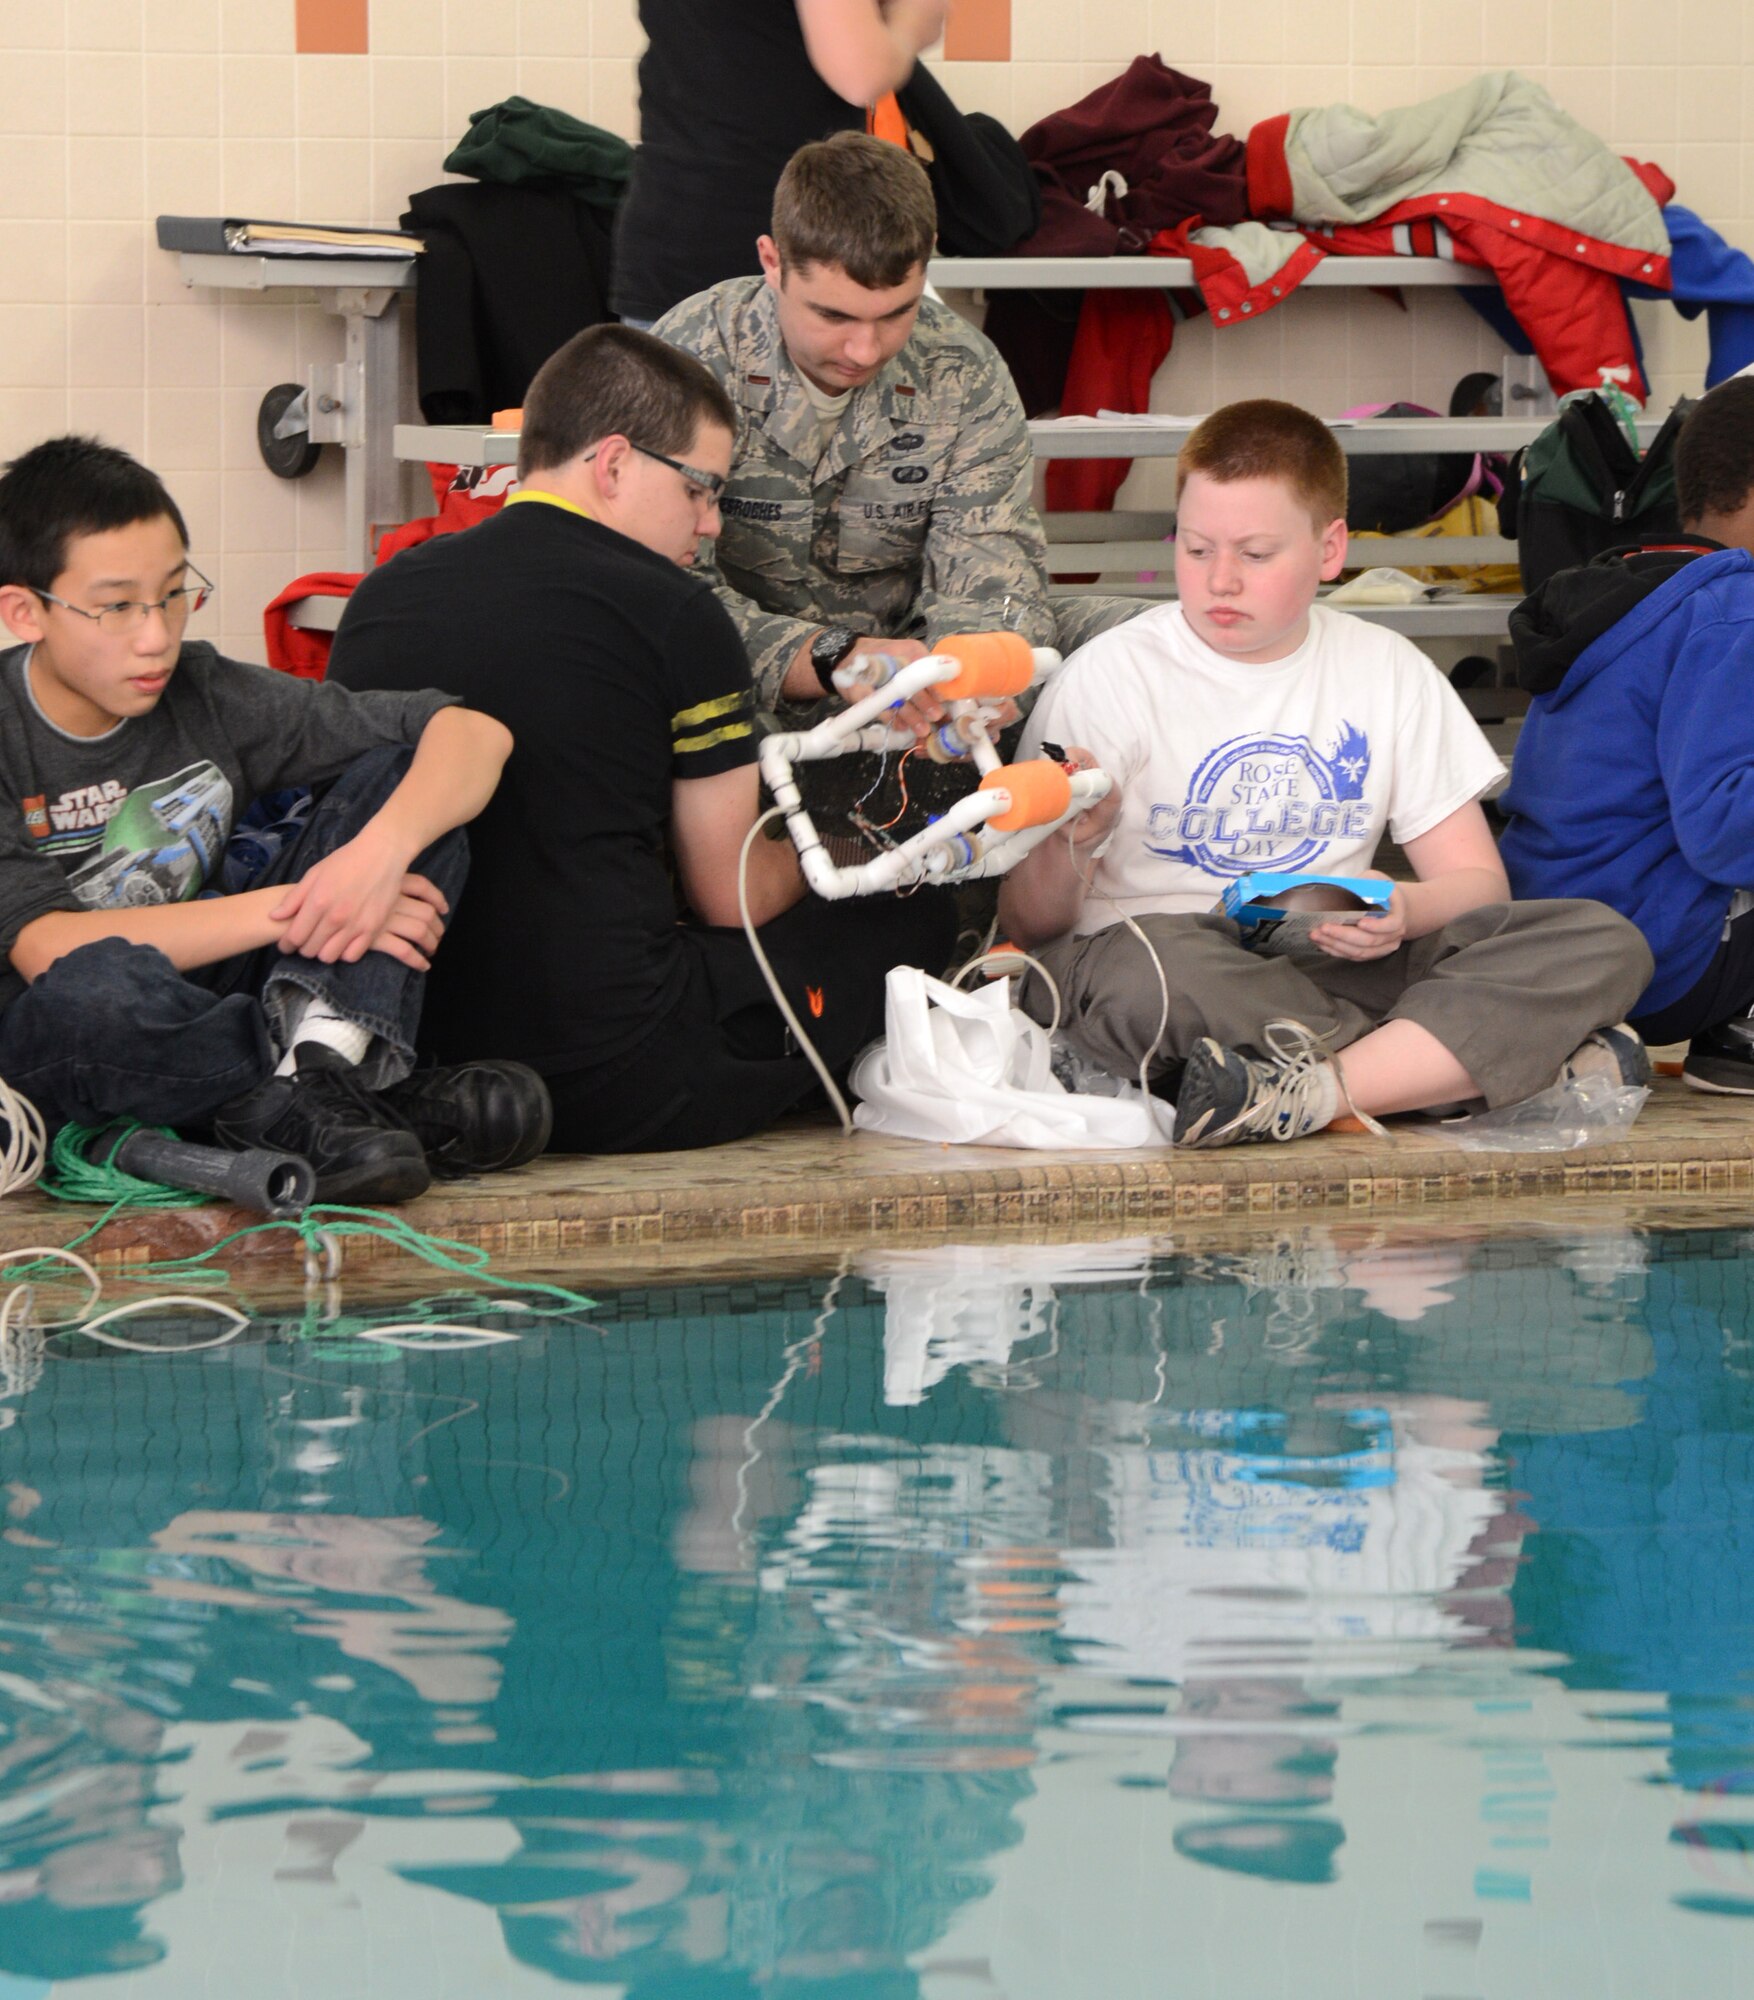 2nd Lt. Jeff Desroches, with the 423rd Supply Chain Management Squadron, helps Kyle Teel and Hunter Wood, both eighth graders, with their SeaPerch ROV.SeaPerch is an underwater robotics program that integrates Science, Technology, Engineering and Mathematics curriculum and pairs students with mentors to learn more about the STEM concepts. Students from Carl Albert Middle School and mentors from Tinker worked together with Starbase Oklahoma to make this character and career-building program successful.